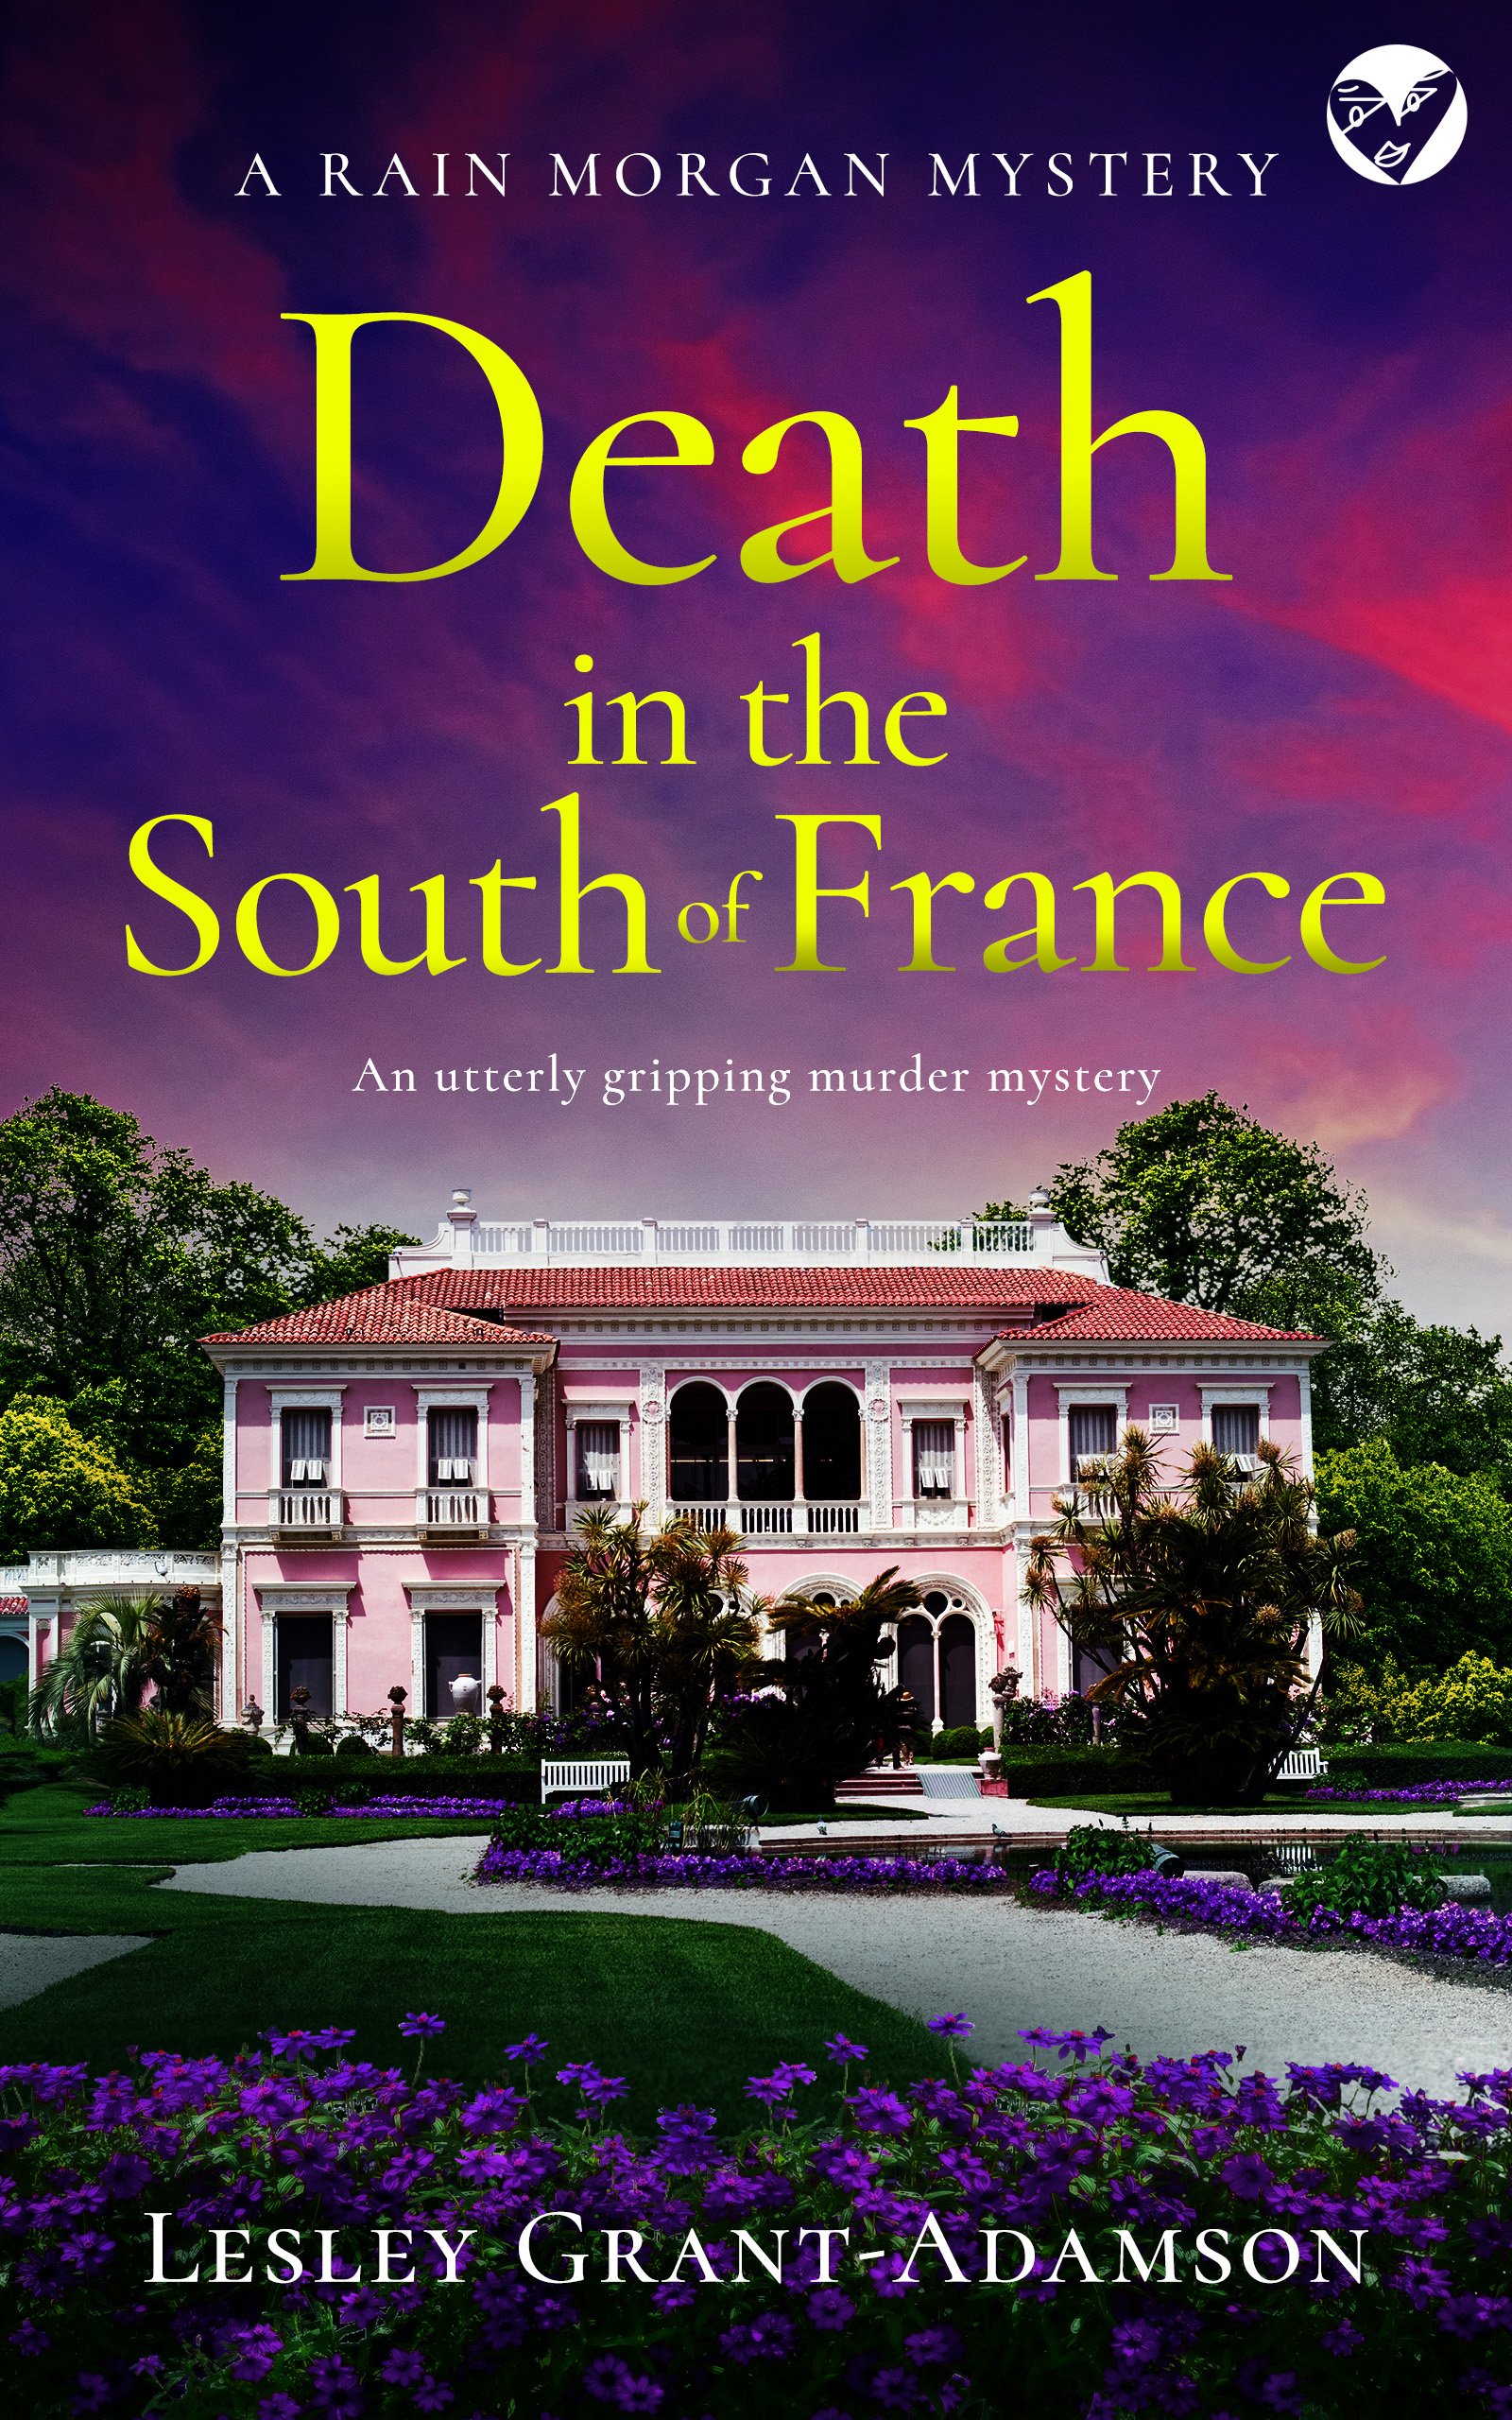 DEATH IN THE SOUTH OF FRANCE cover publish.jpg